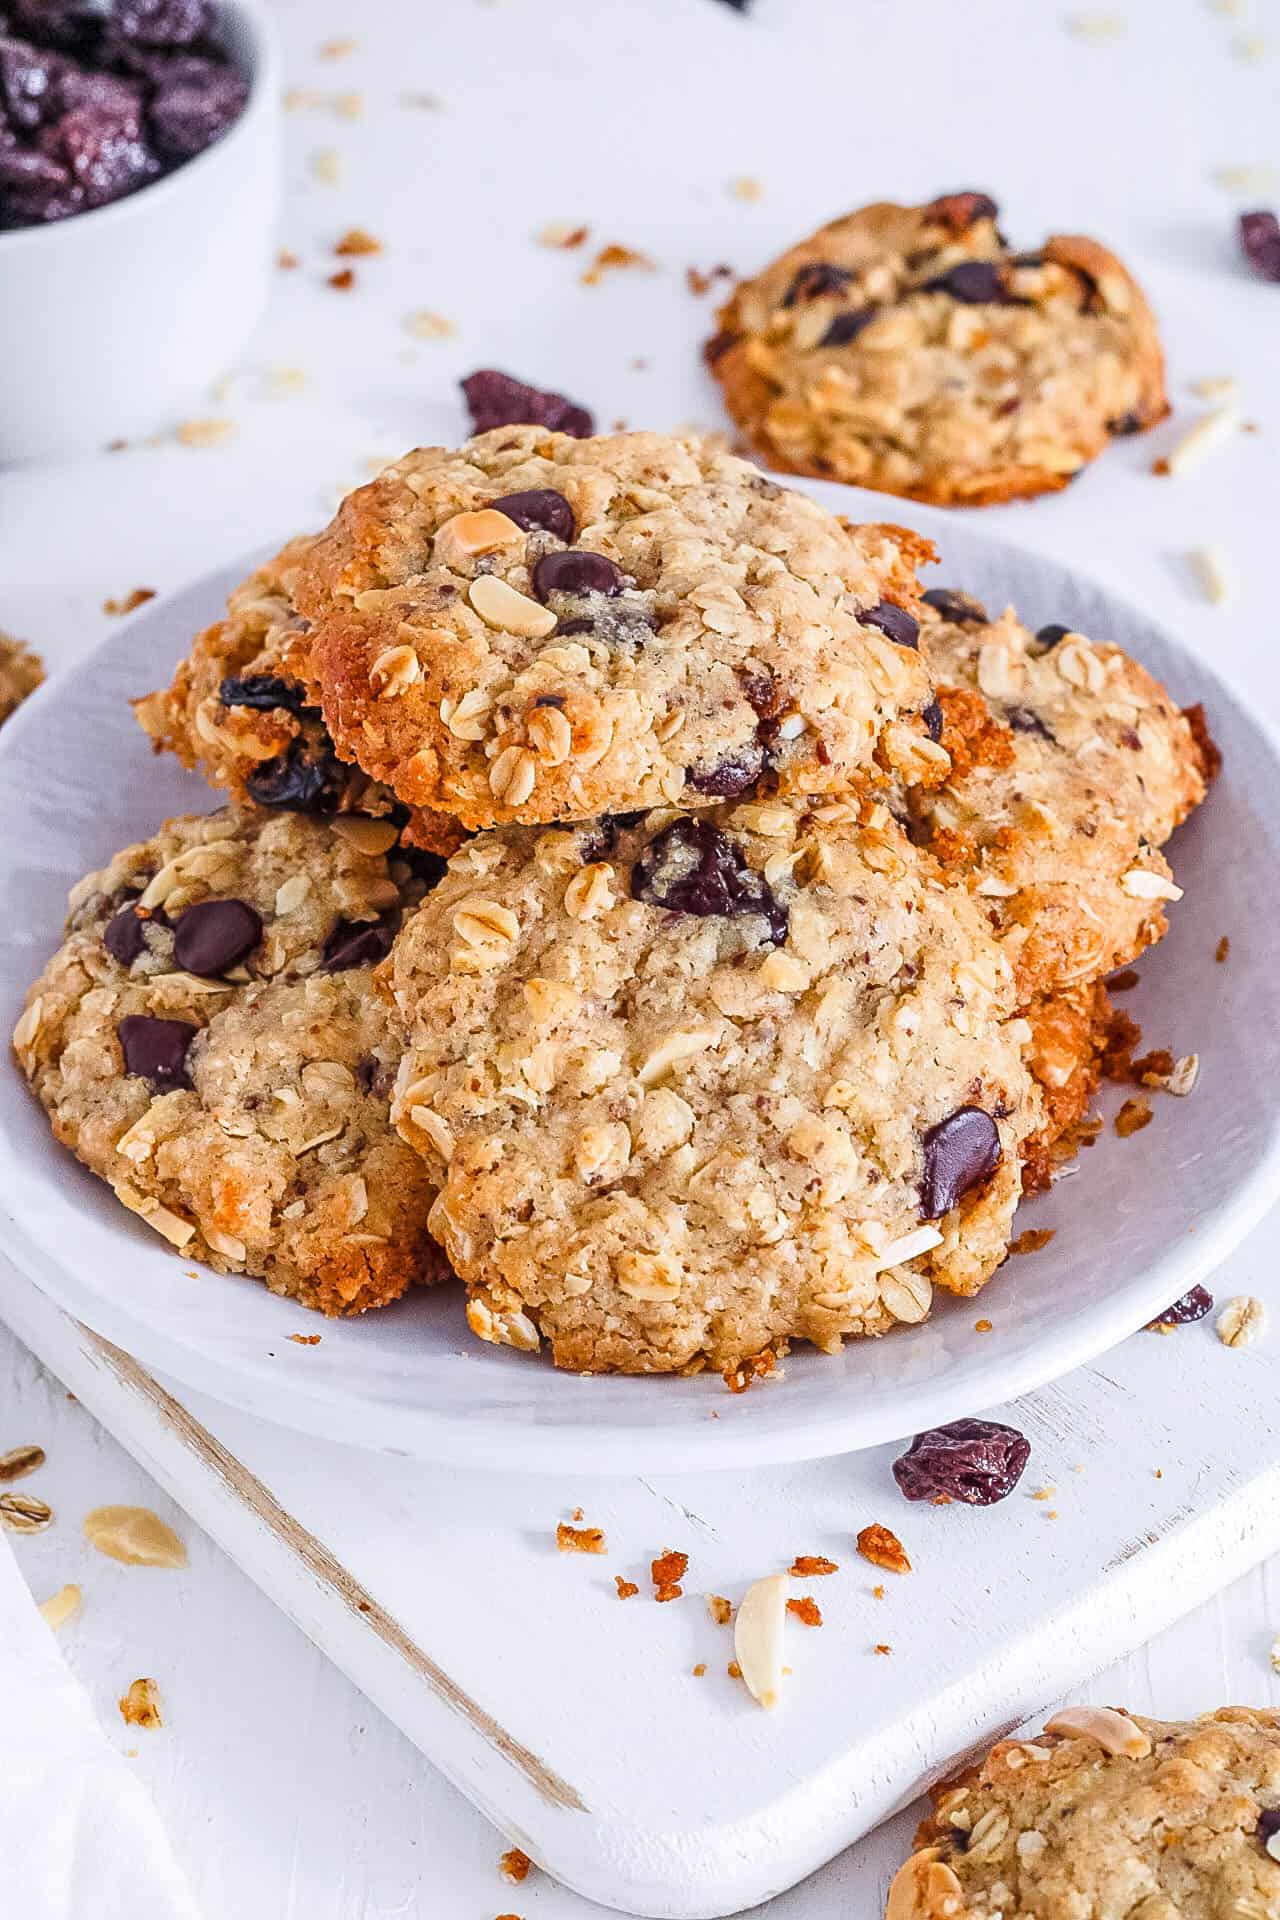 Vegan oatmeal chocolate chip cookies recipe stacked on a white plate.